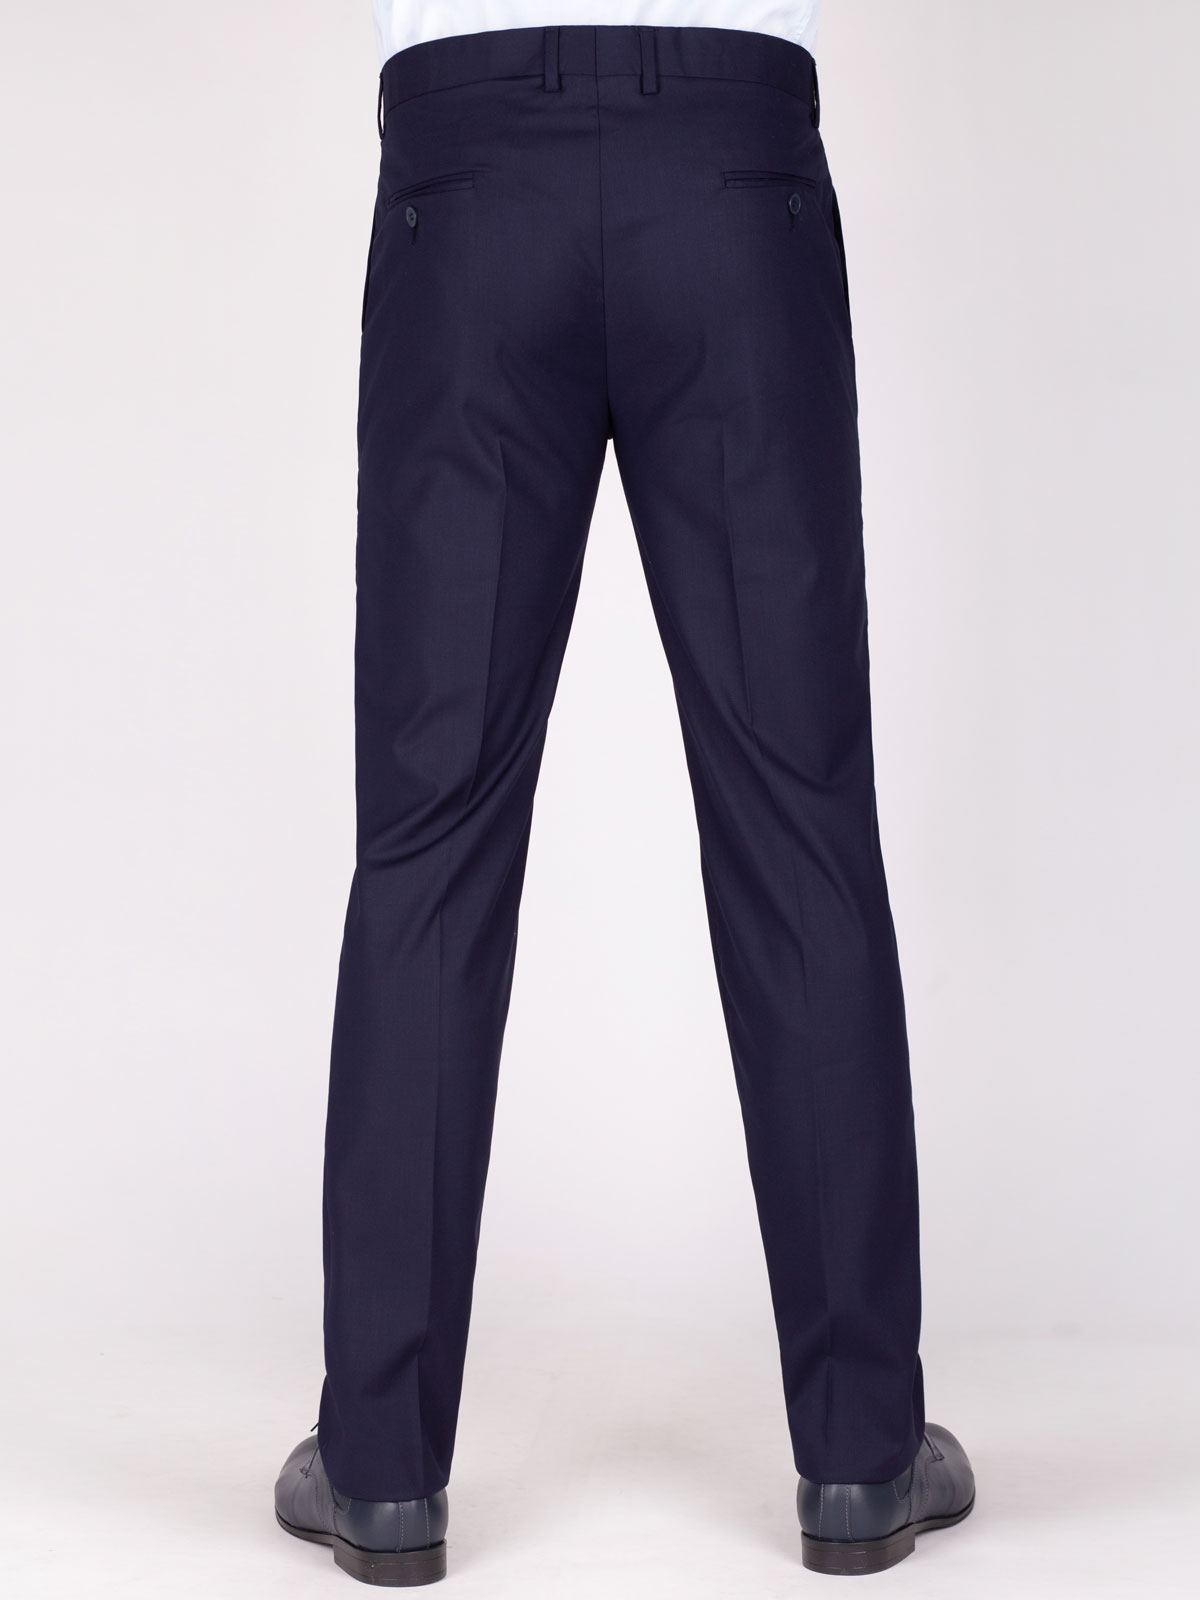 Navy Blue Slim Fit Trousers | L.O.S Collection